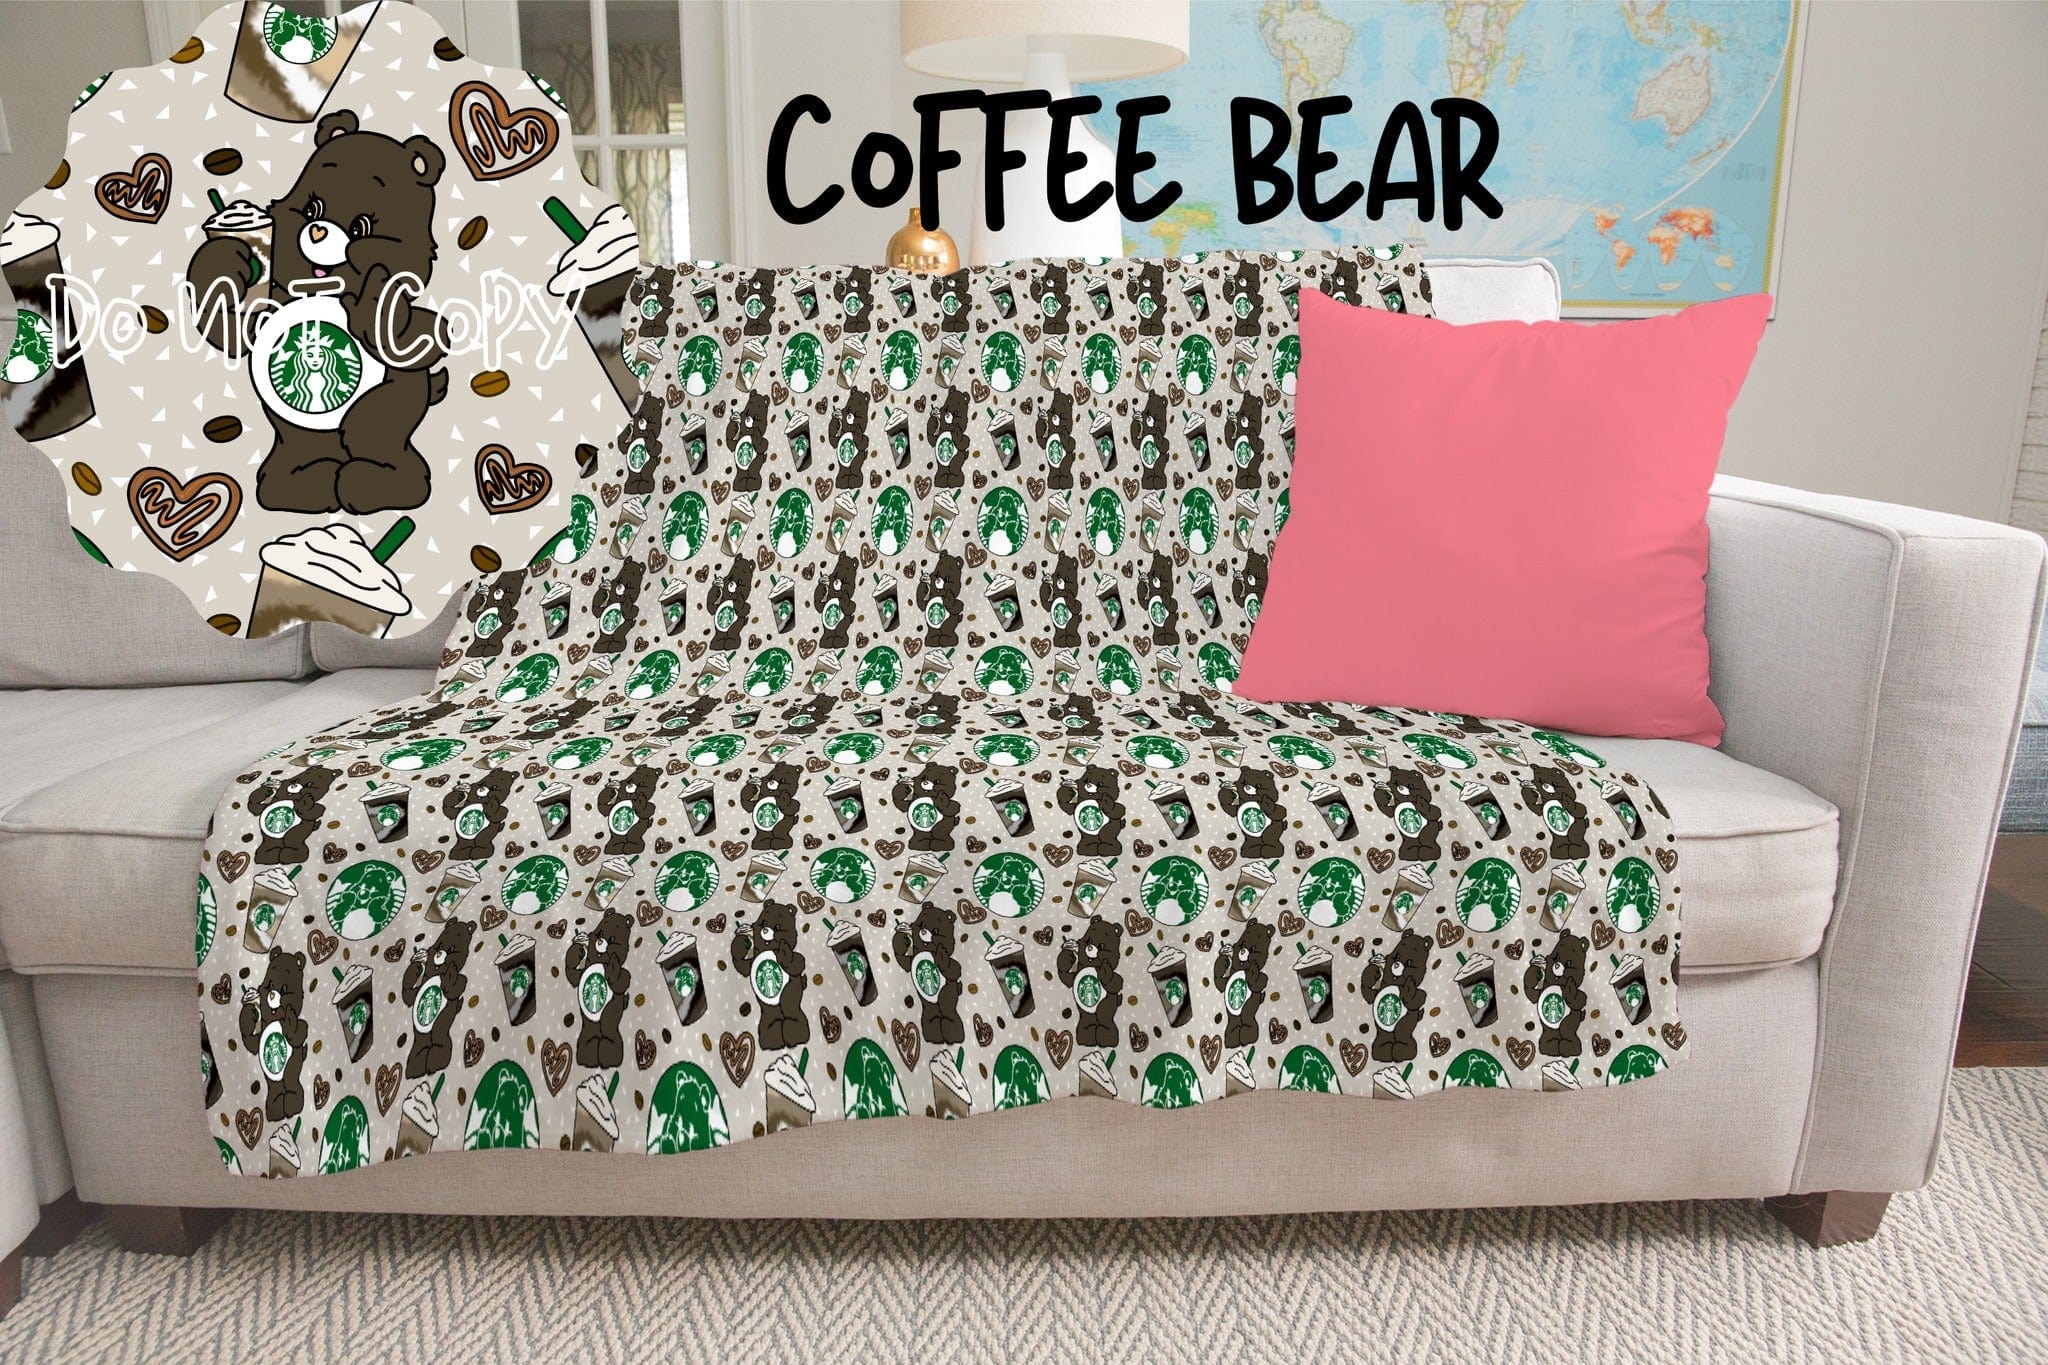 COFFEE BEAR- GIANT SHAREABLE THROW BLANKETS-Stay Foxy Boutique, Florissant, Missouri